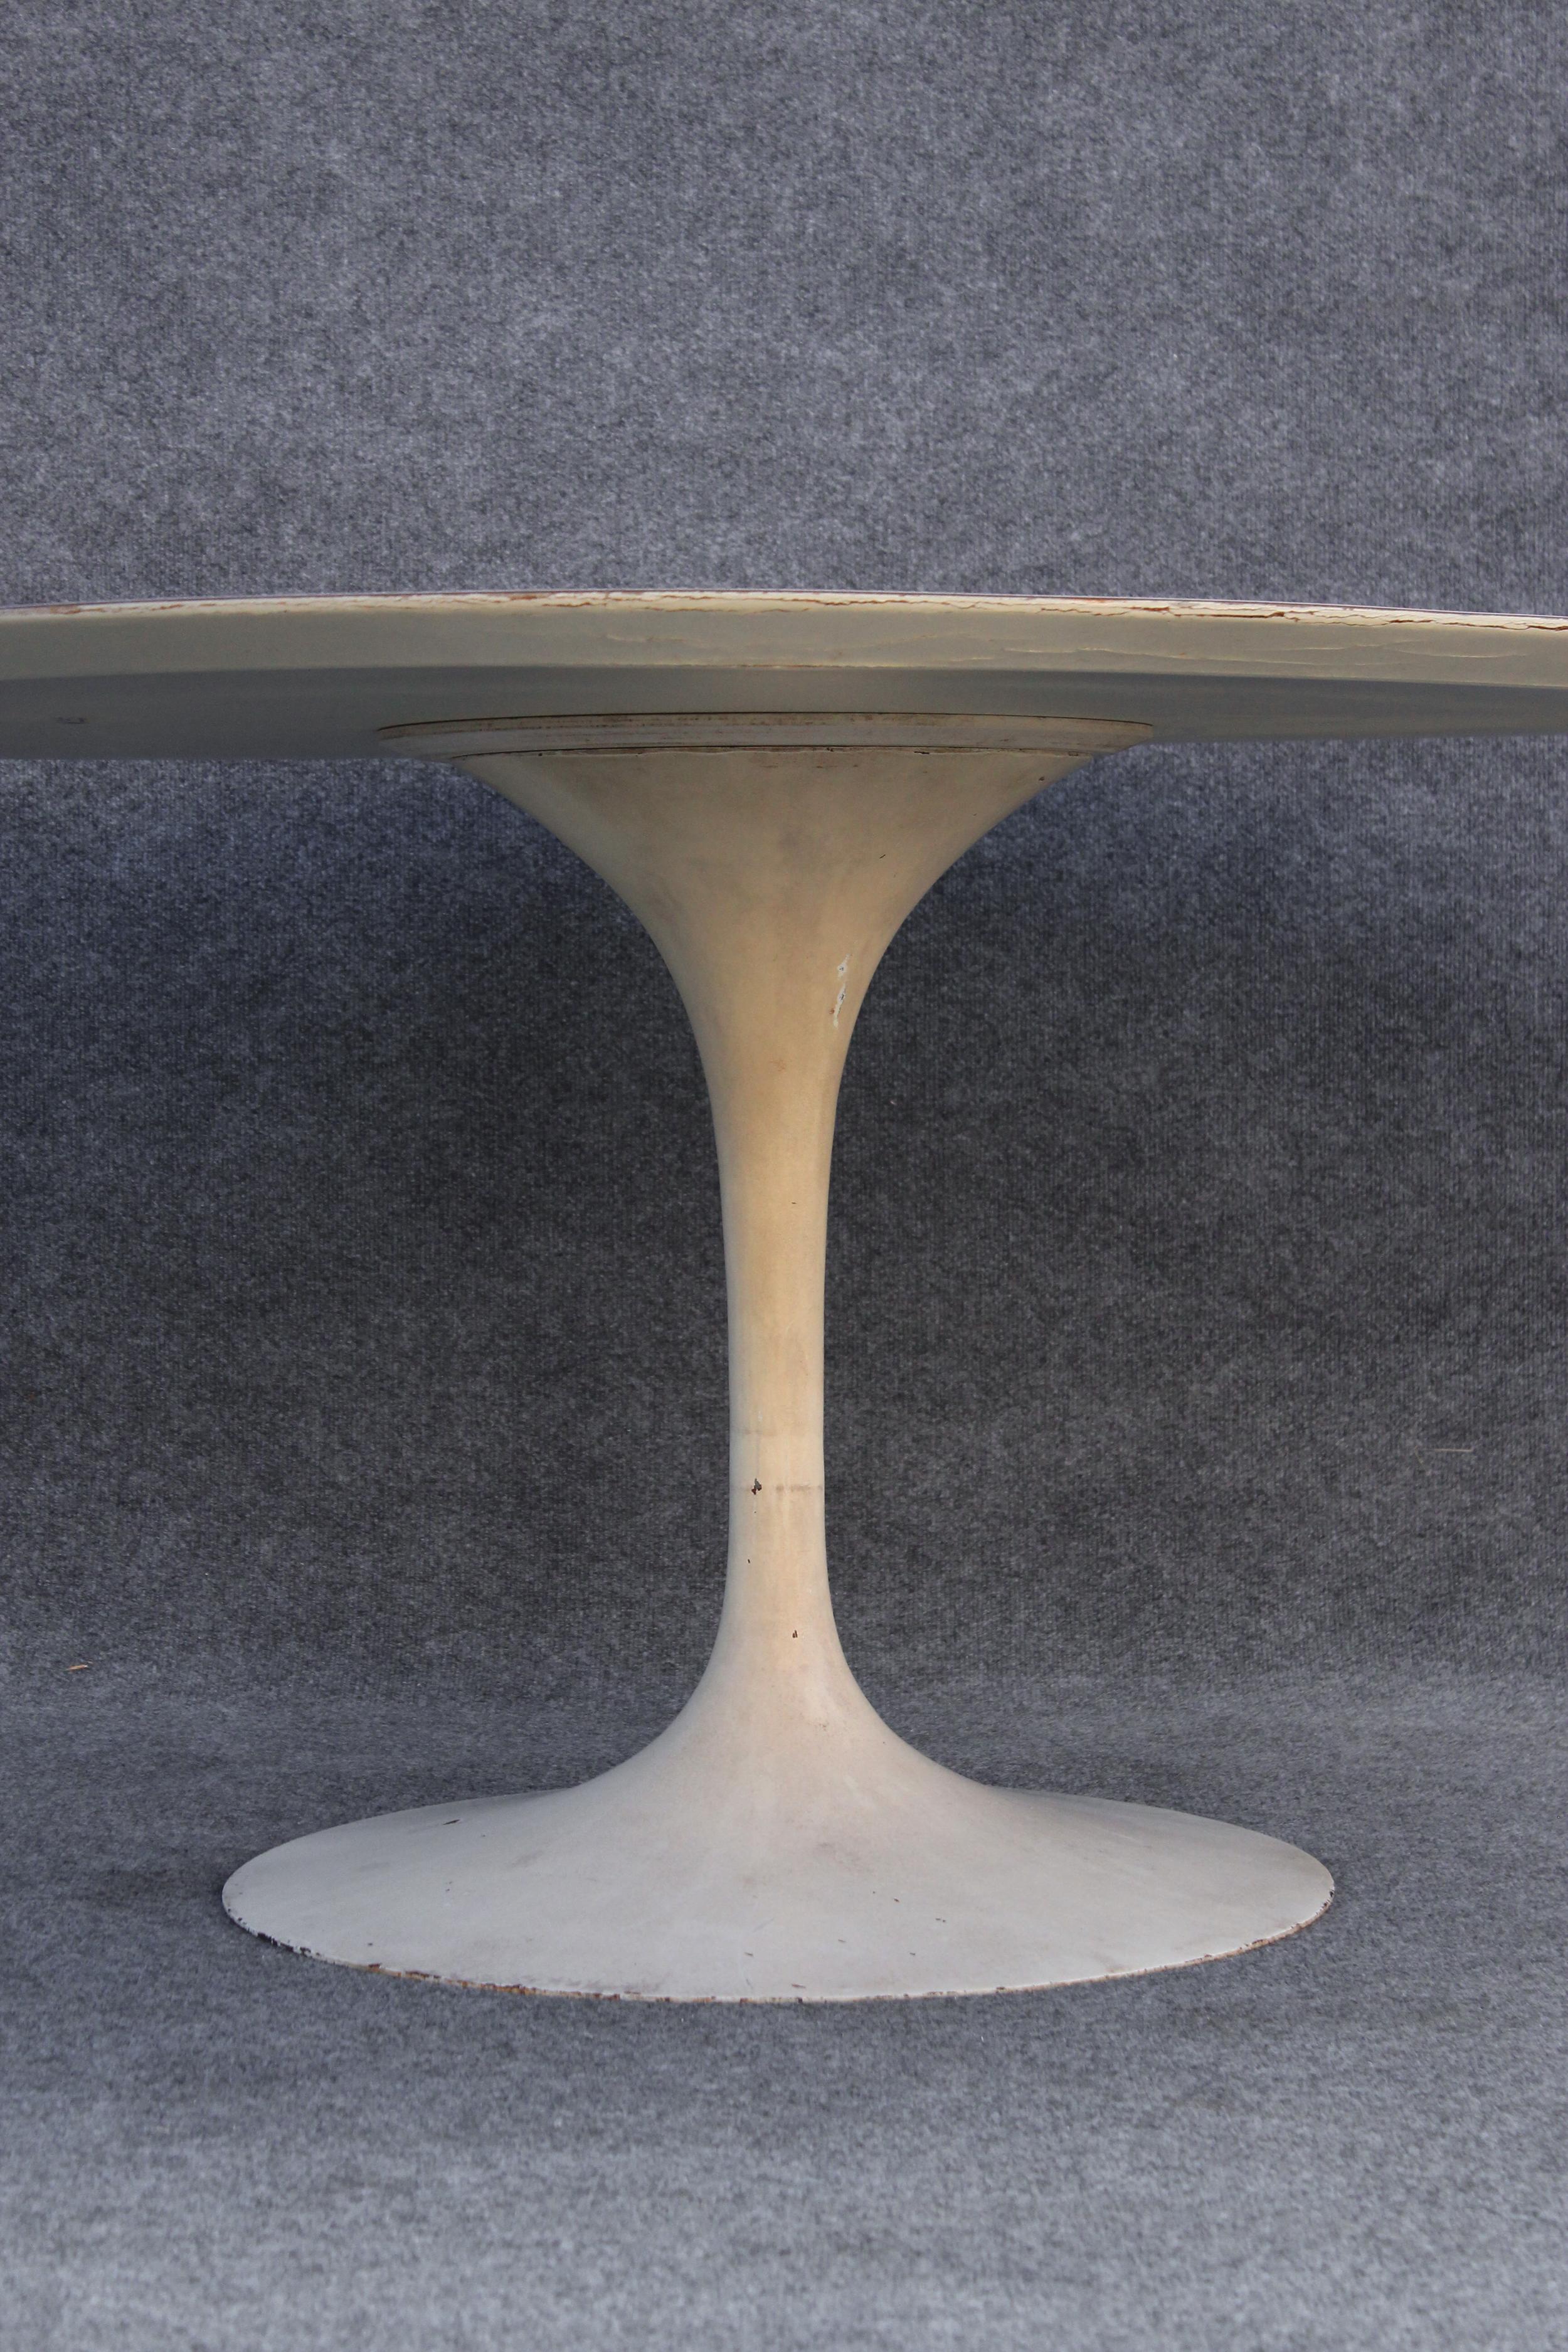 Designed in 1957 by Eero Saarinen, this table was produced by Knoll shortly thereafter, dated to circa 1961 by the label un the underside, making this one of the earliest tables out there. The top is finished in the classic smooth white